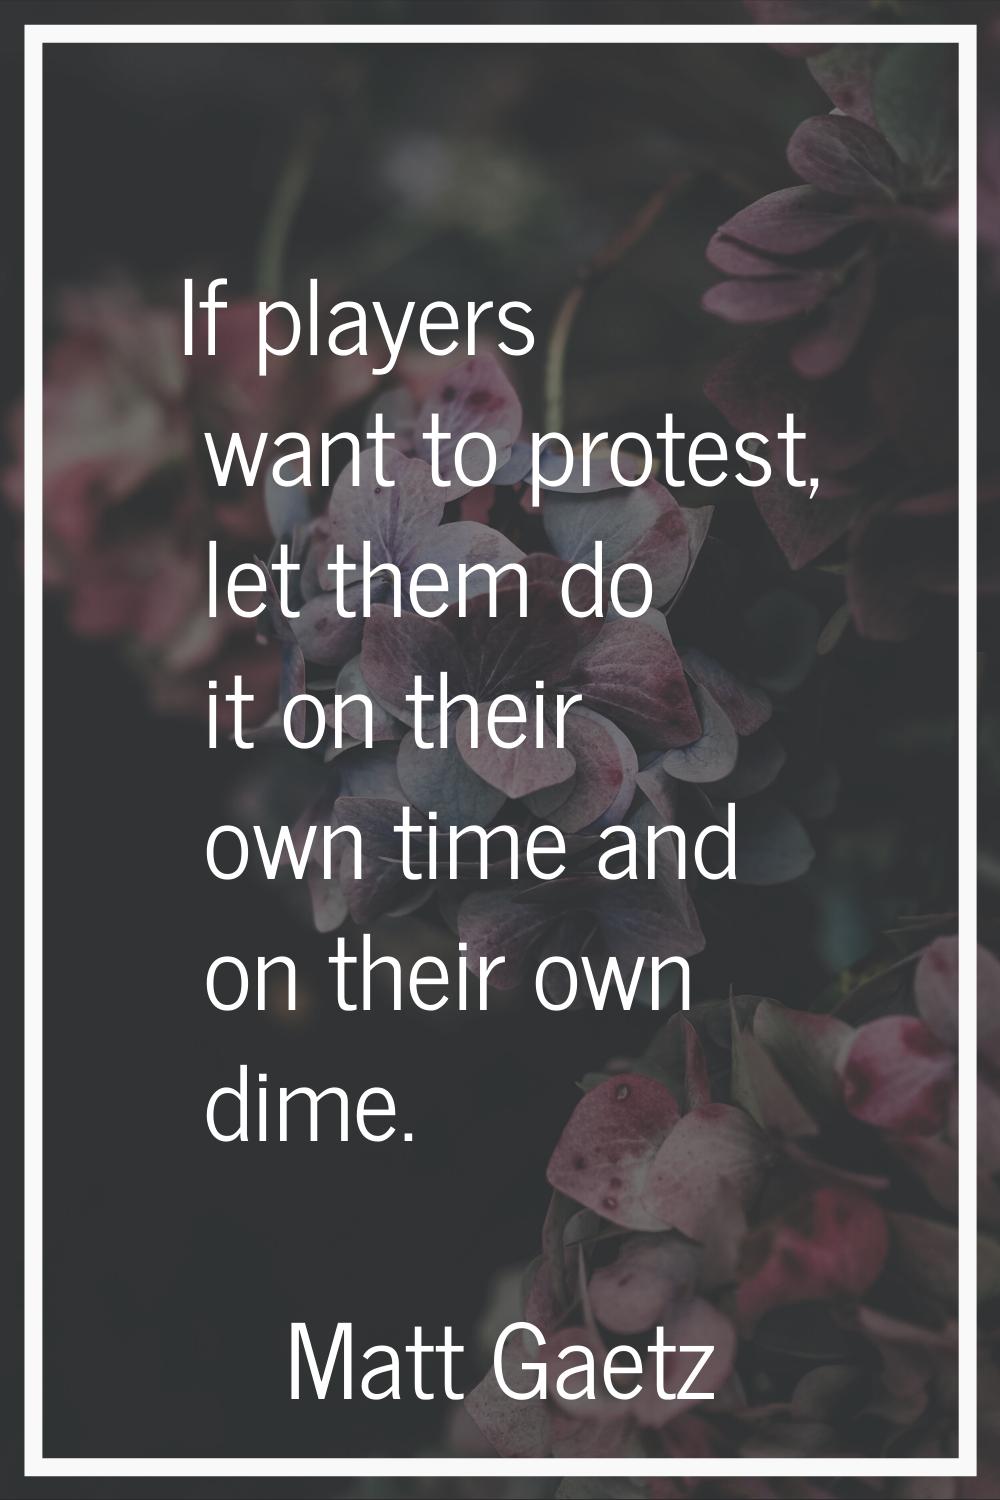 If players want to protest, let them do it on their own time and on their own dime.